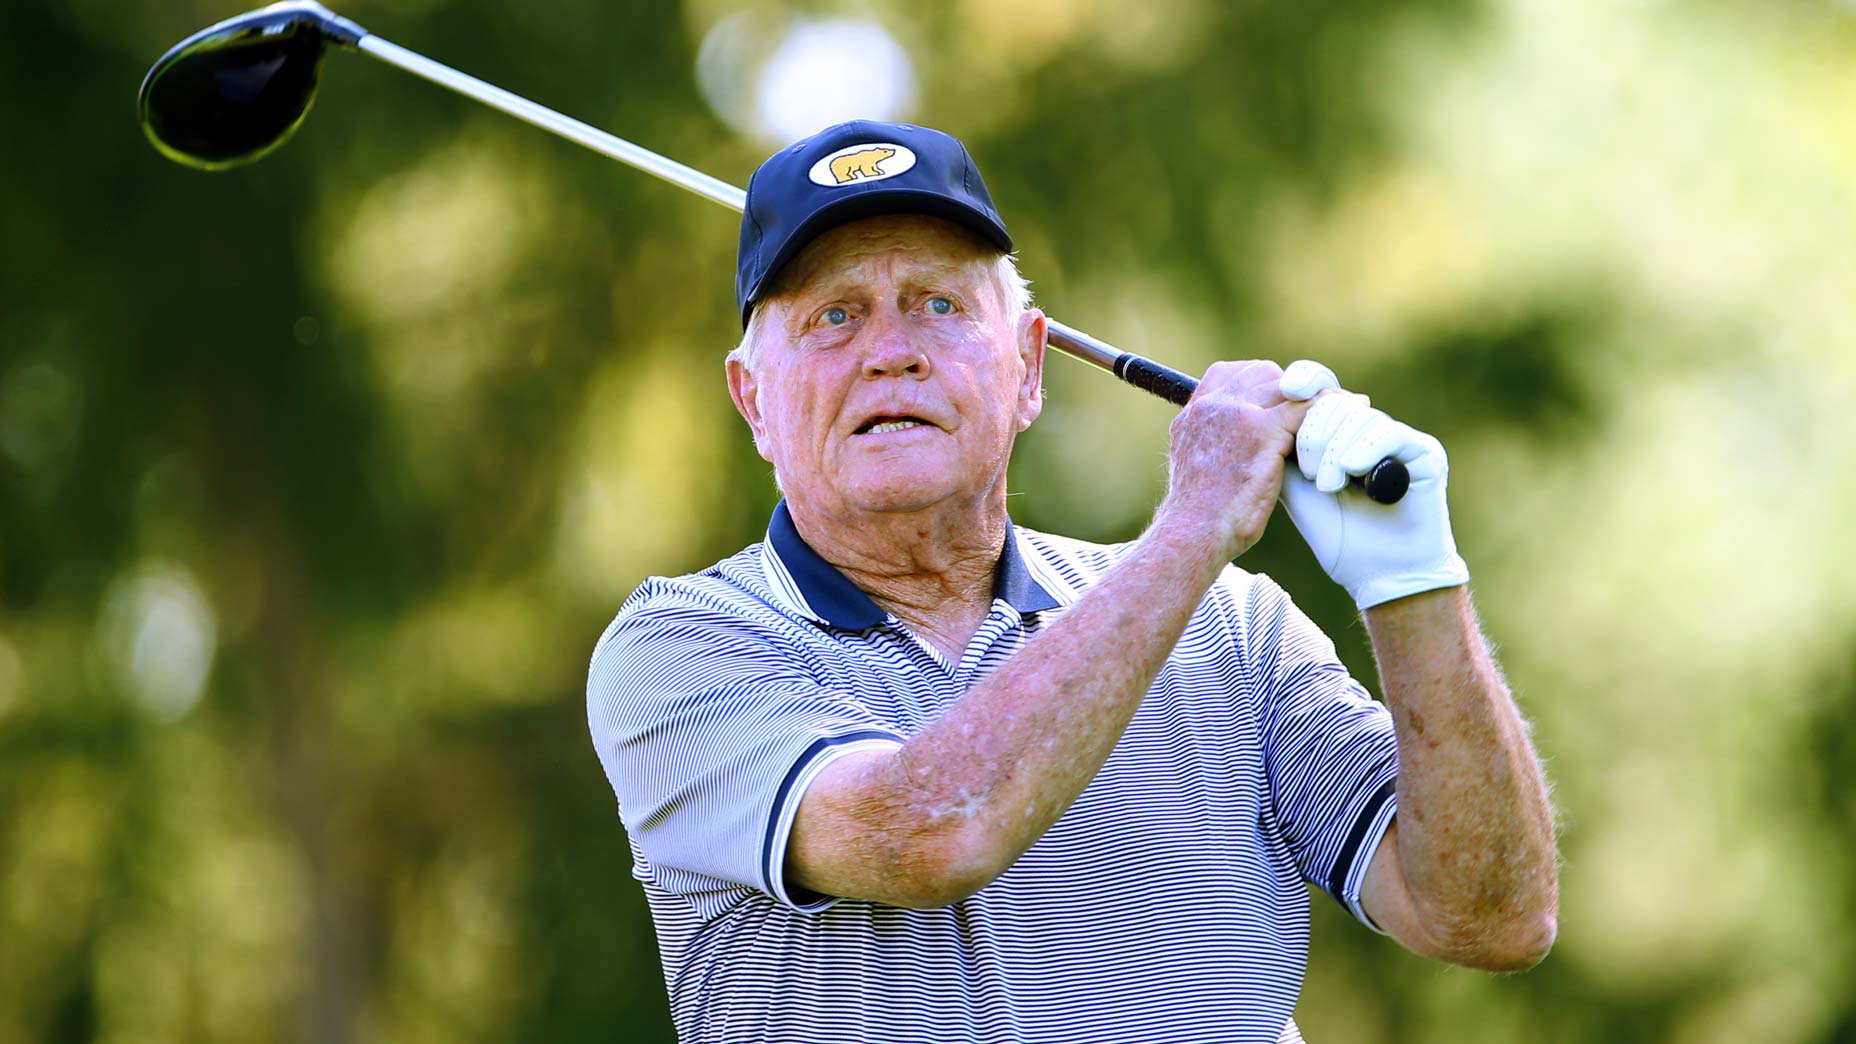 Jack Nicklaus wins No. 19 (sort of) and 2 stories you